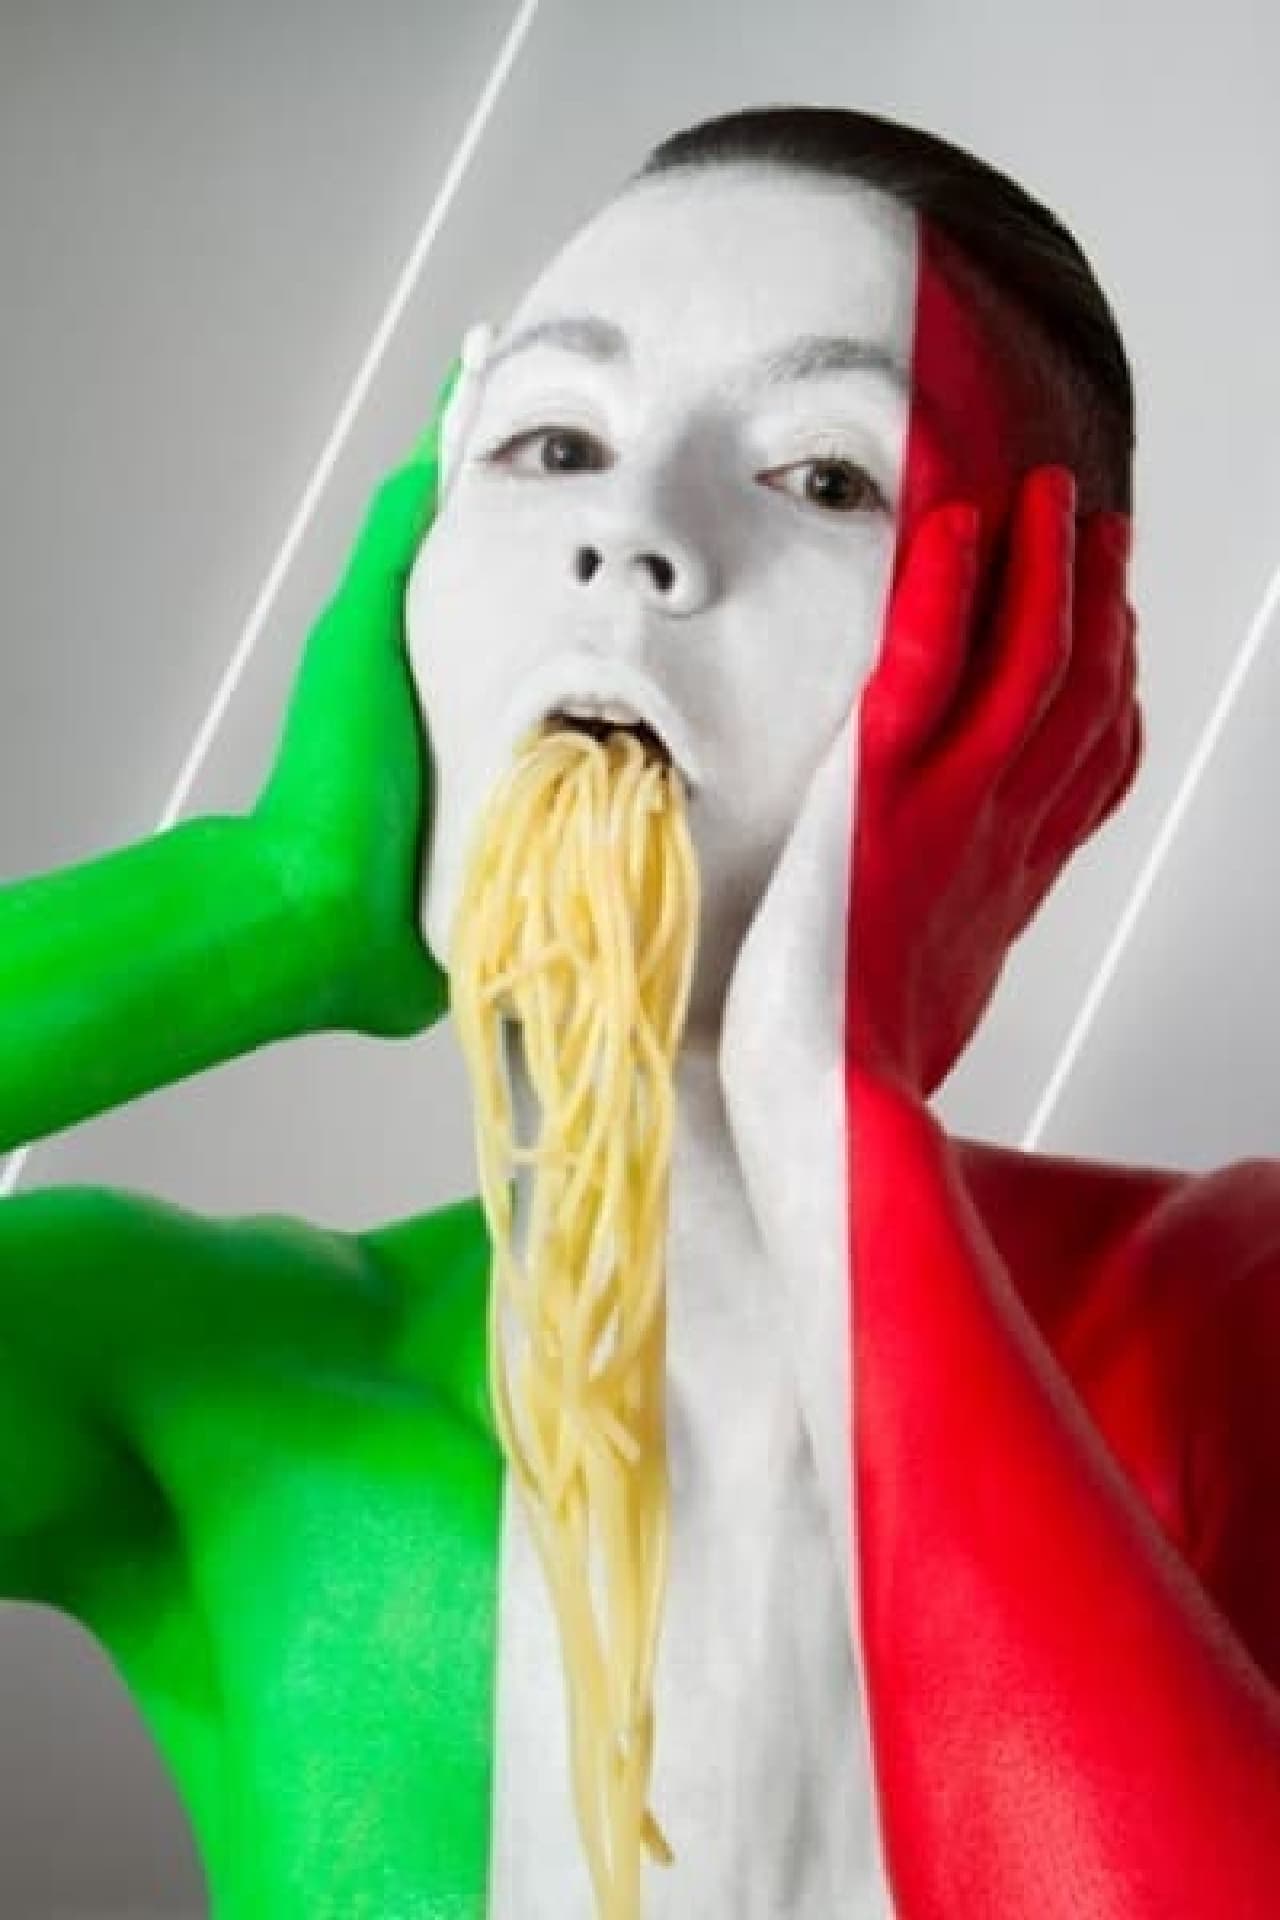 Spaghetti from the mouth. Source: jonathanicher.com